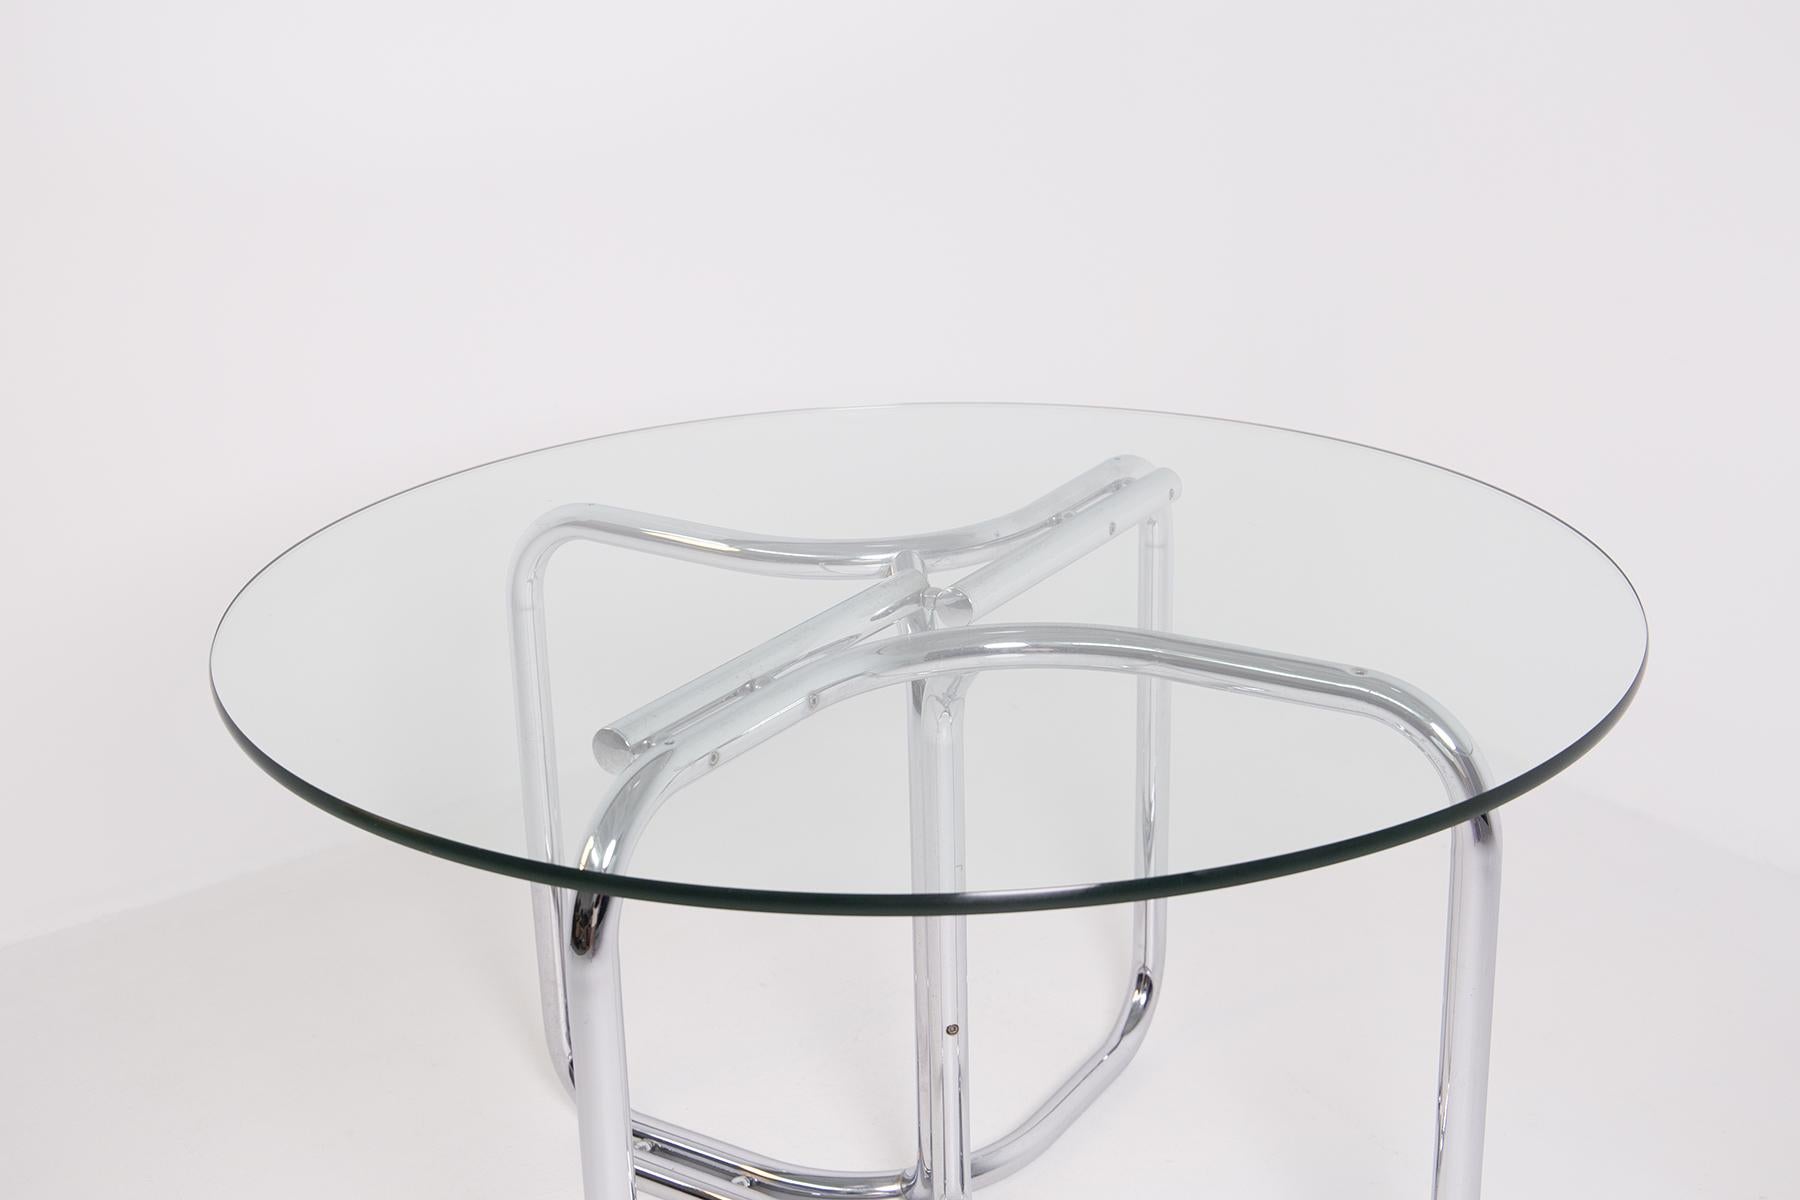 Modern Italian table from the 1970s by Giotto Stoppino in steel and thick glass.
The table has a thick glass top with a round circular shape in original condition.
The particularity of the round table is in its support structure made of tubular